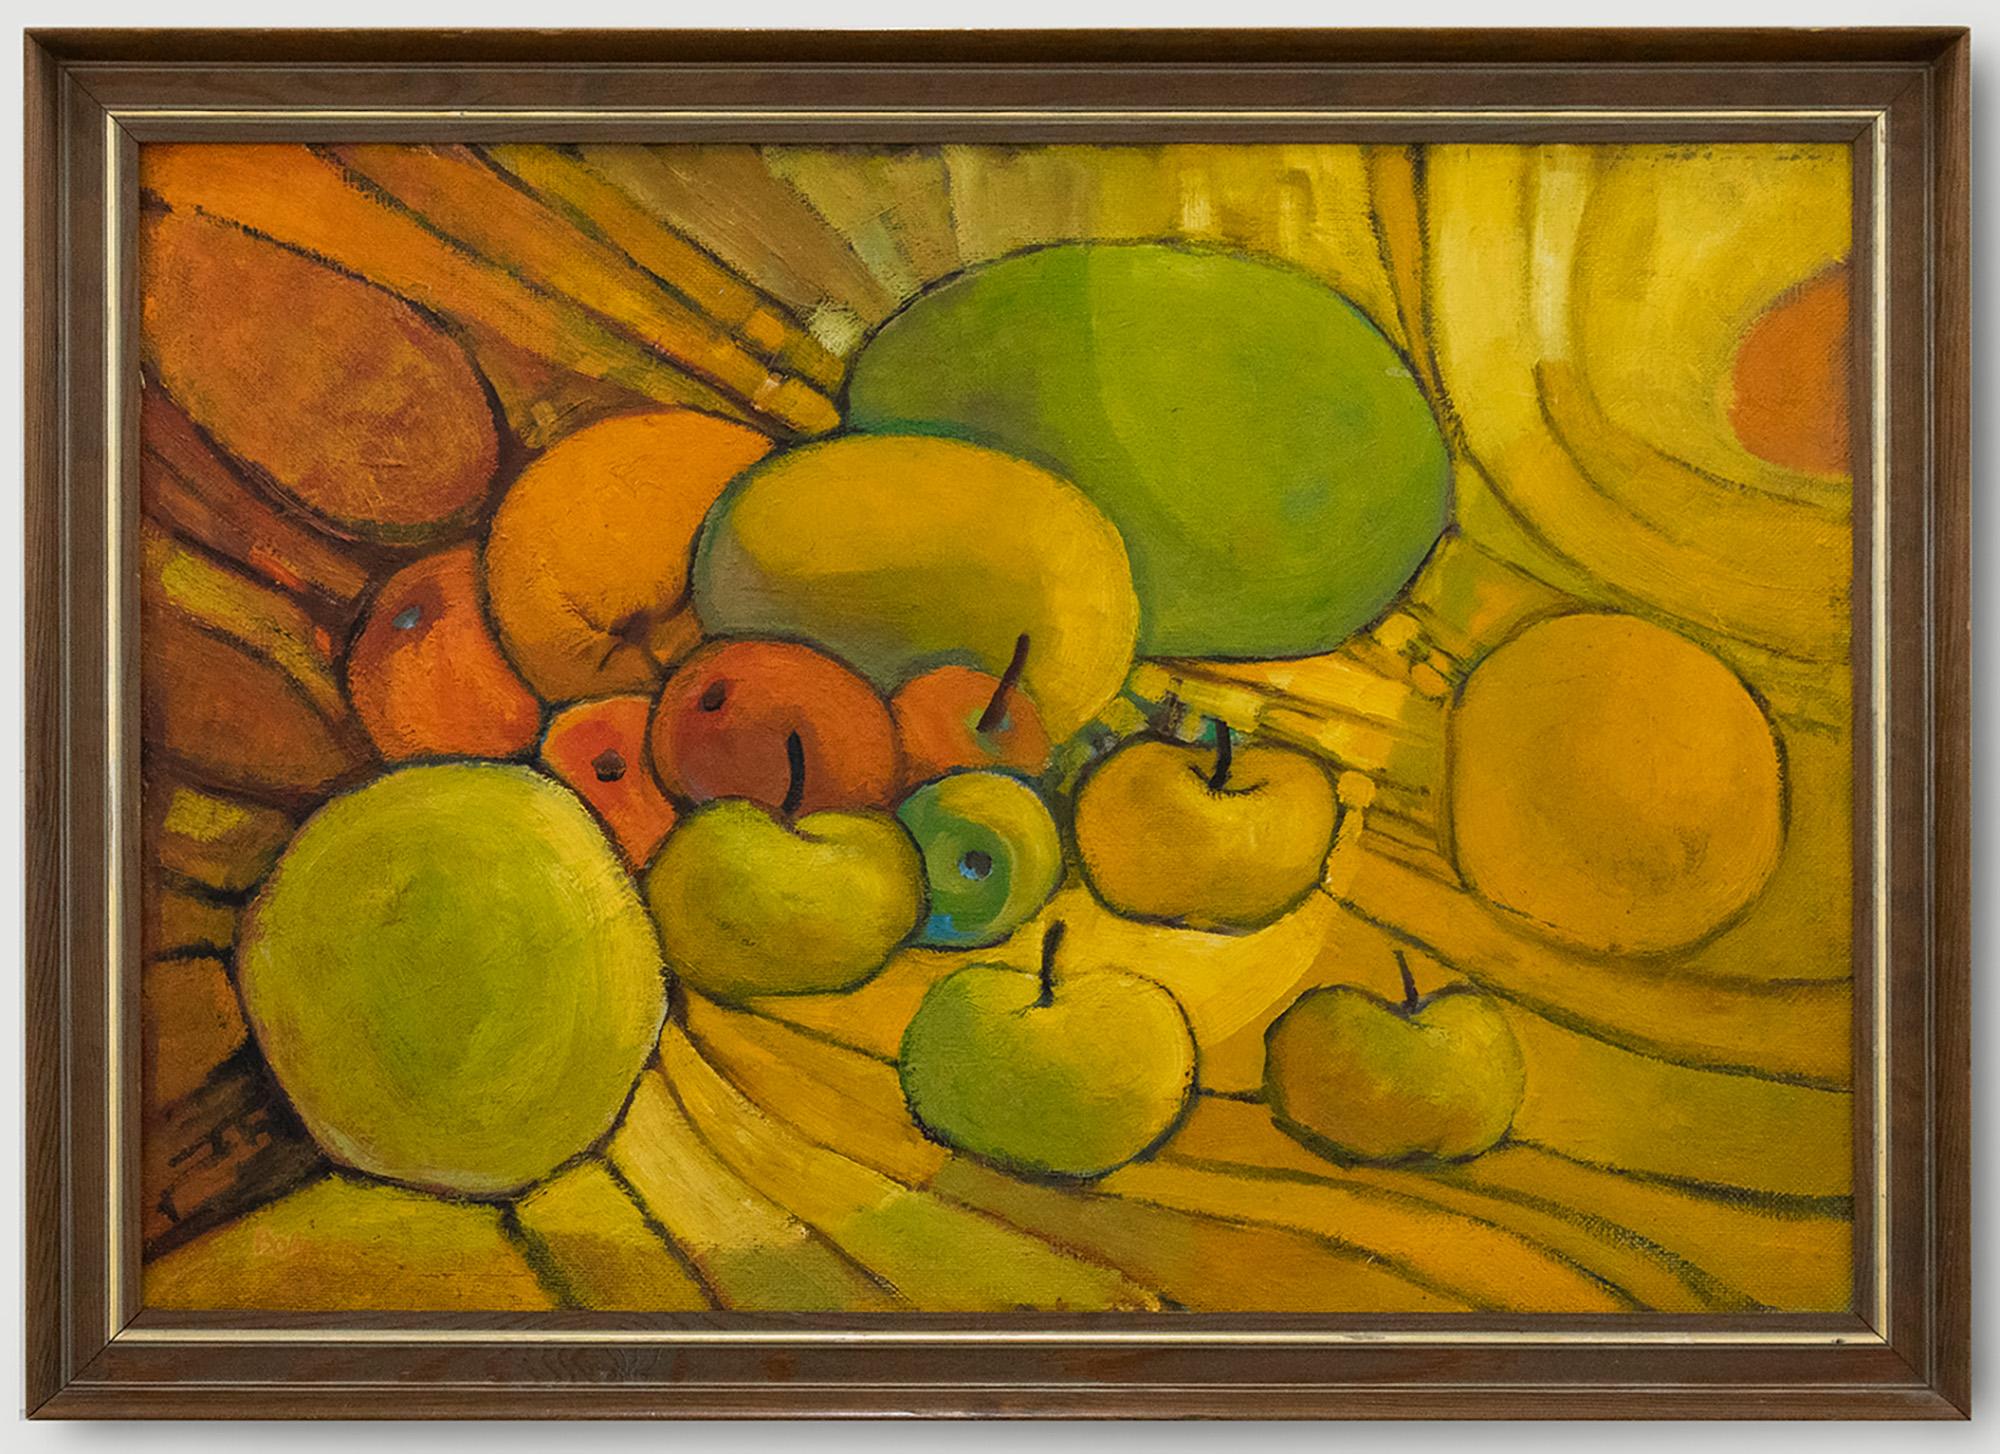 A colourful study of fruit placed on linen. The artist captures the scene in a burst of warm colours, using bold forms and strong outlines to create an eye-catching composition. Signed and dated to the lower right. Presented in a wooden frame. On